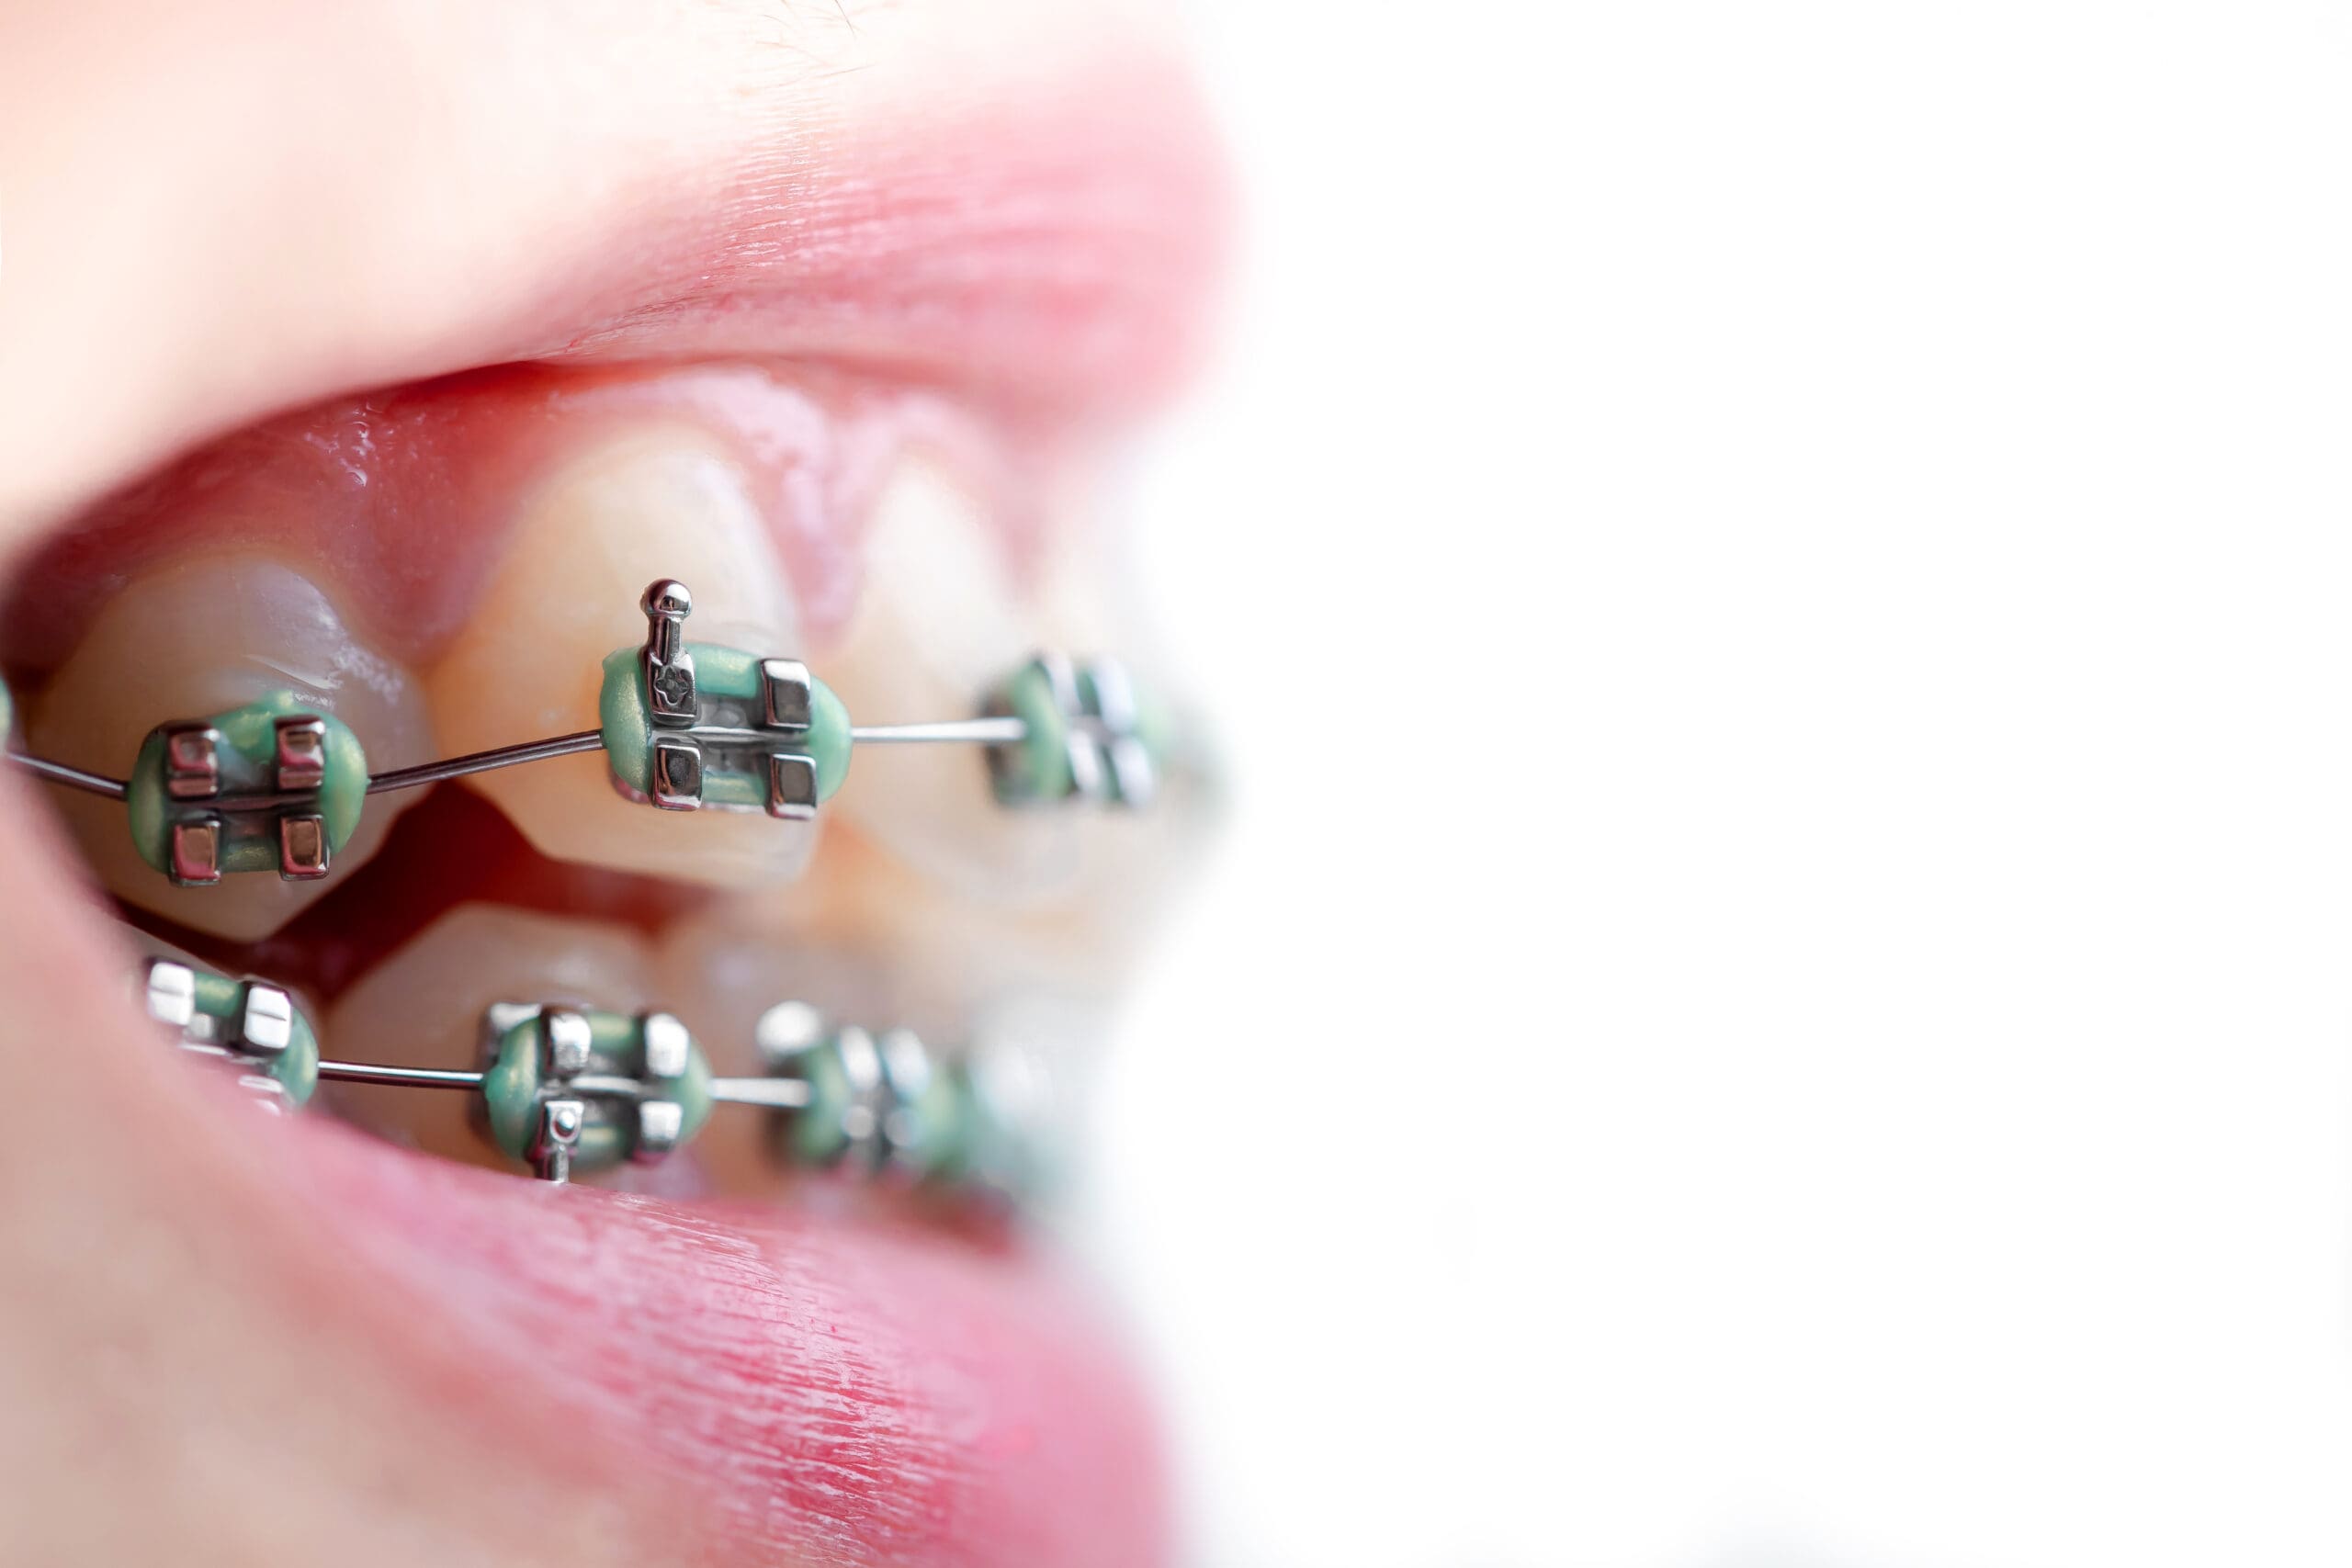 A close up of a person's mouth undergoing the orthodontic process with braces.